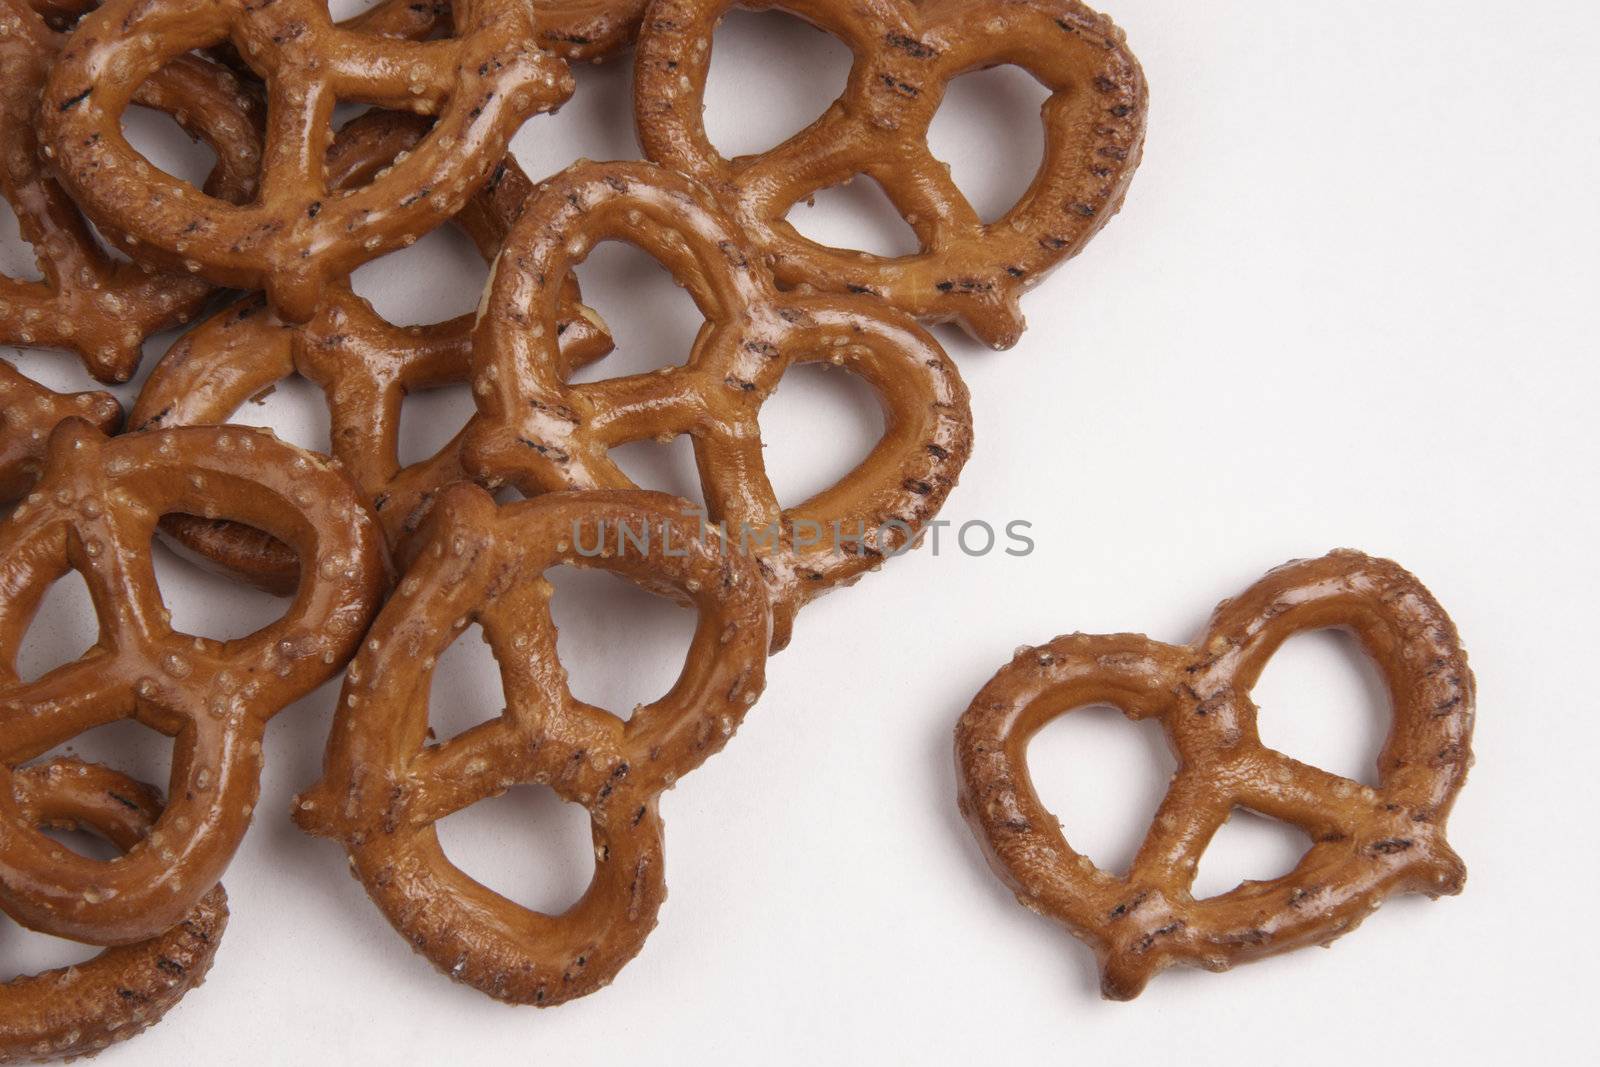 Big Salted Pretzels on White by ChrisBoswell